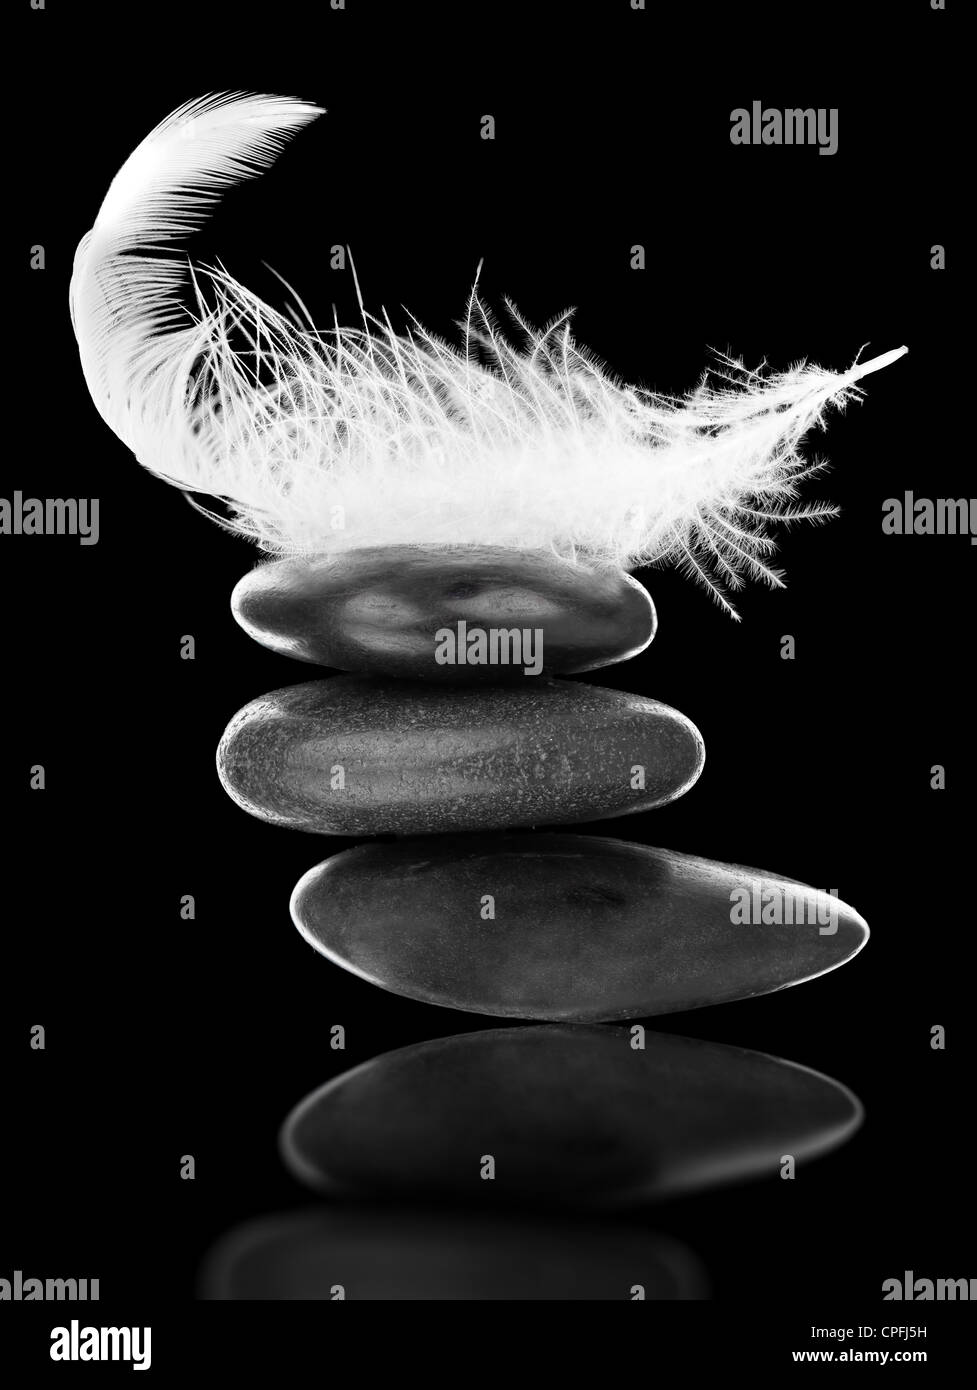 White feather on stack of black pebbles over black background - balance, stability or equilibrium concept Stock Photo